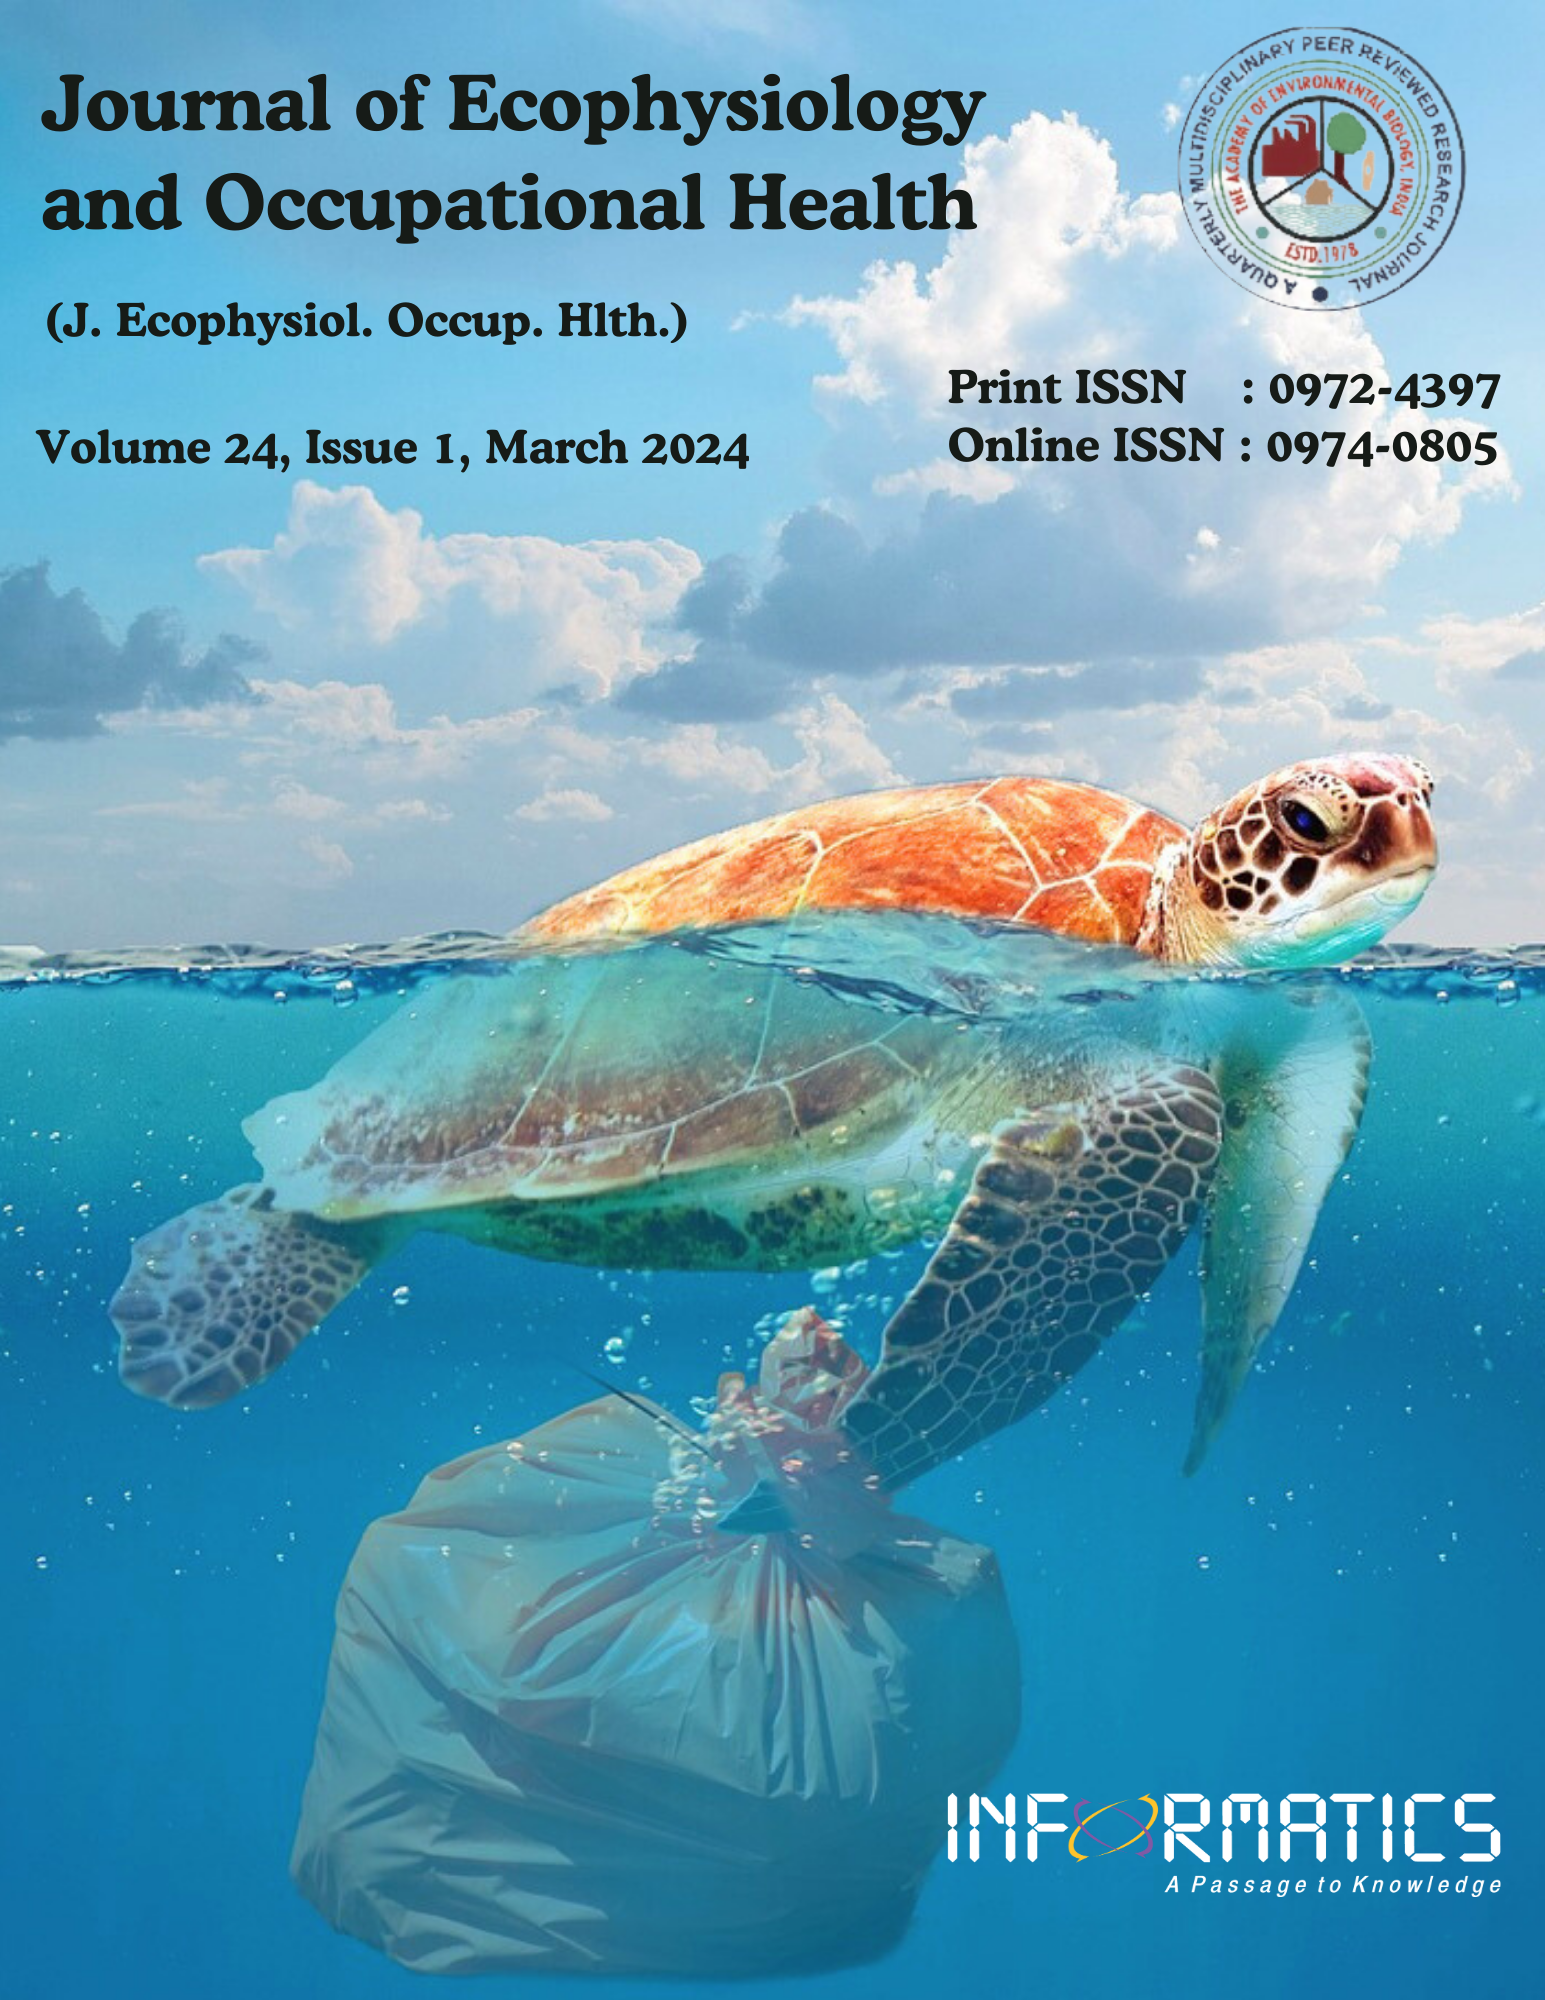 					View Volume 24, Issue 1, March 2024
				